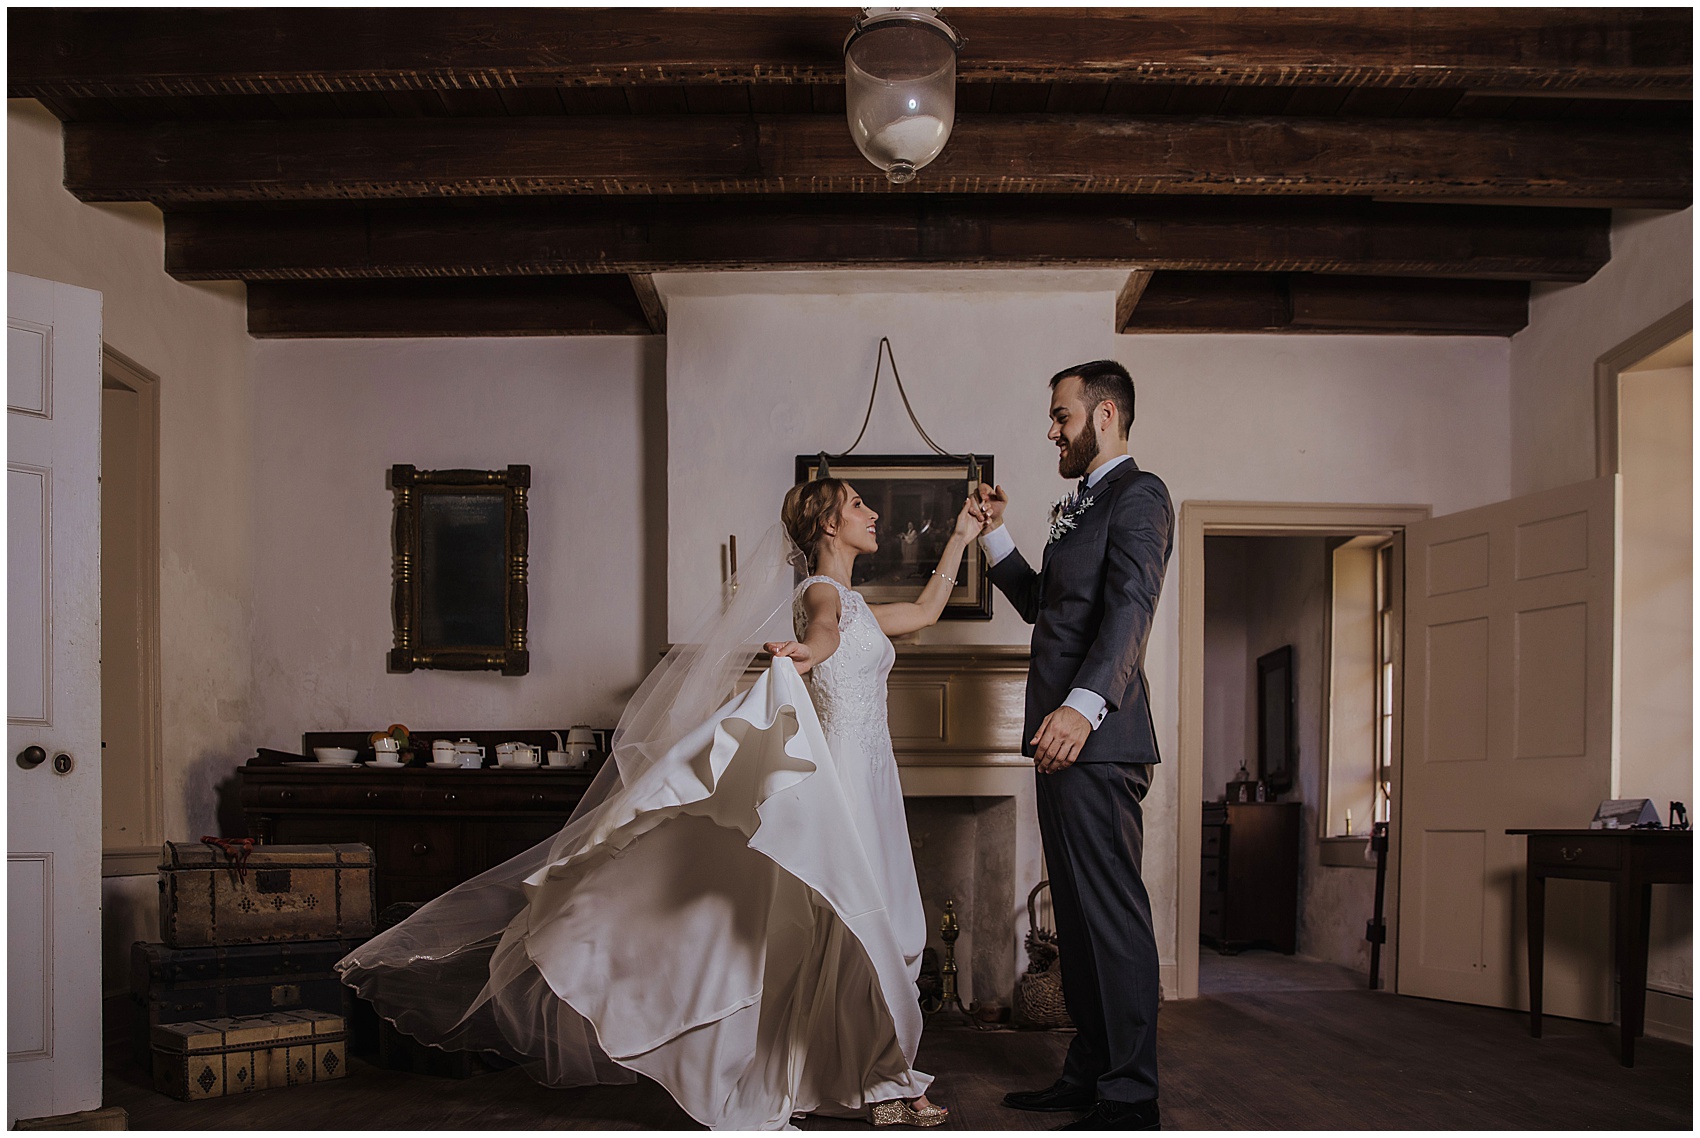 Newlyweds dance together in an historical room at flagler college wedding